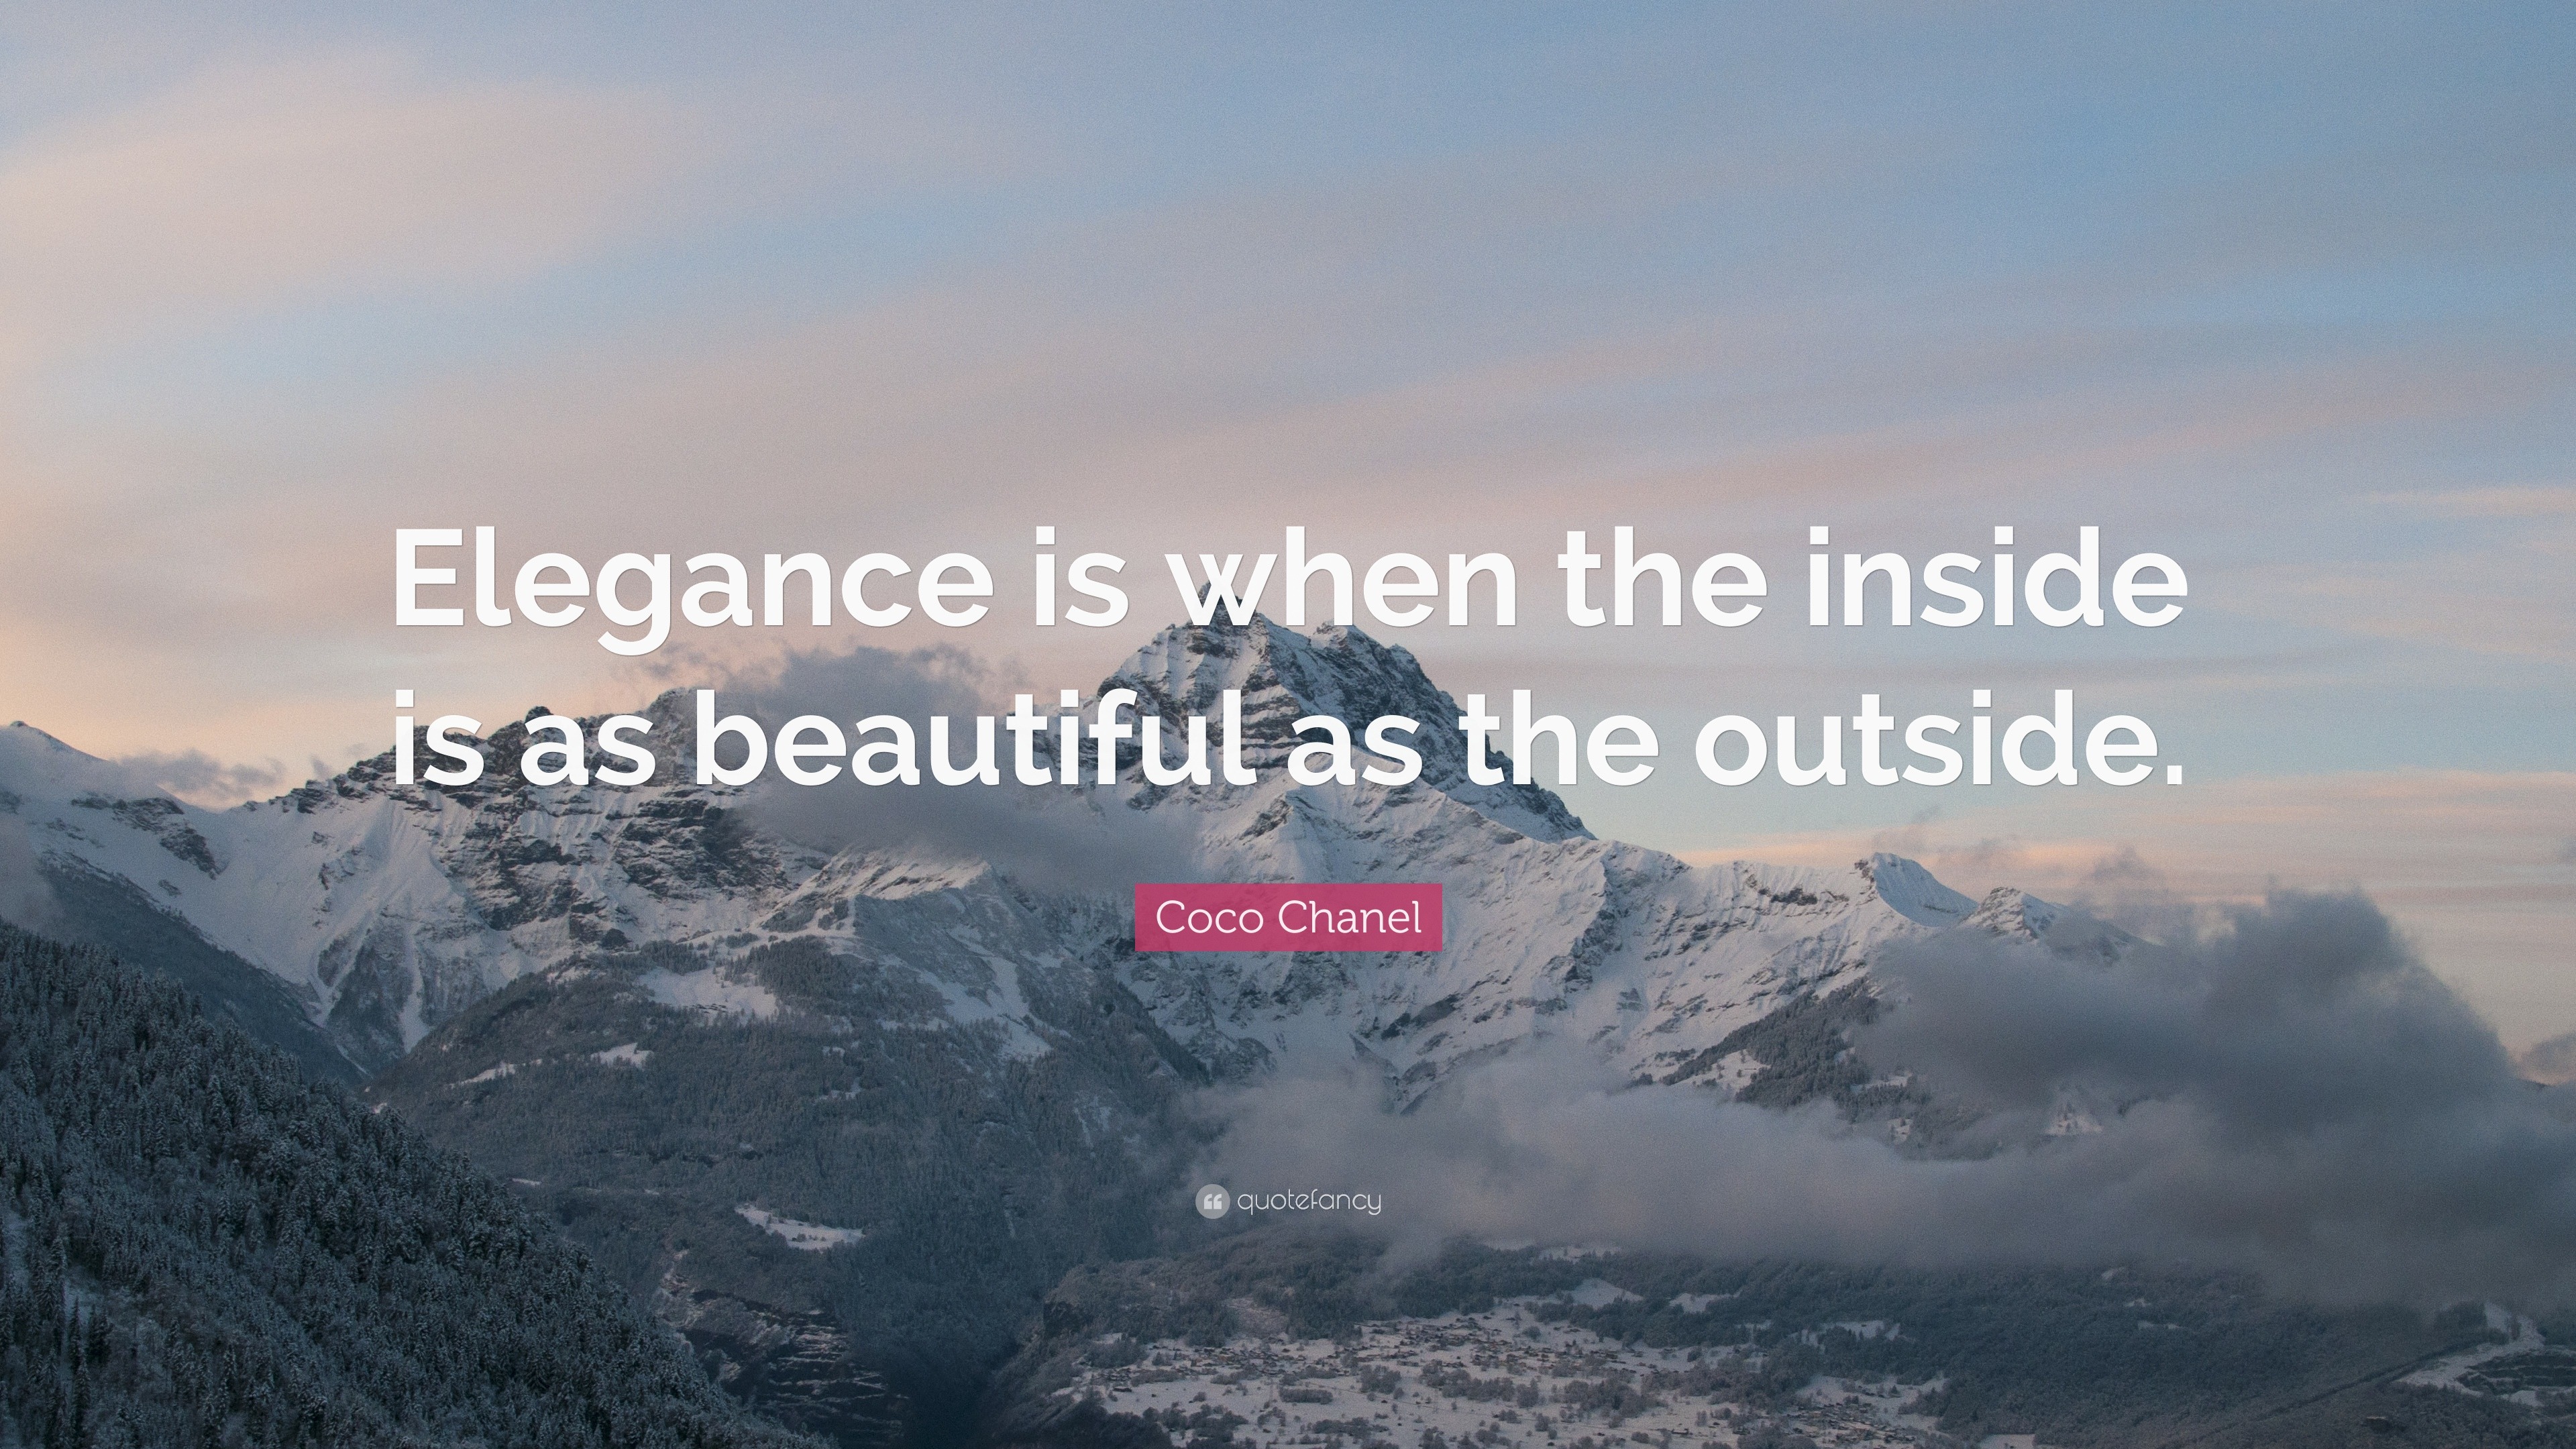 Coco Chanel Quote: “Elegance is when the inside is as beautiful as